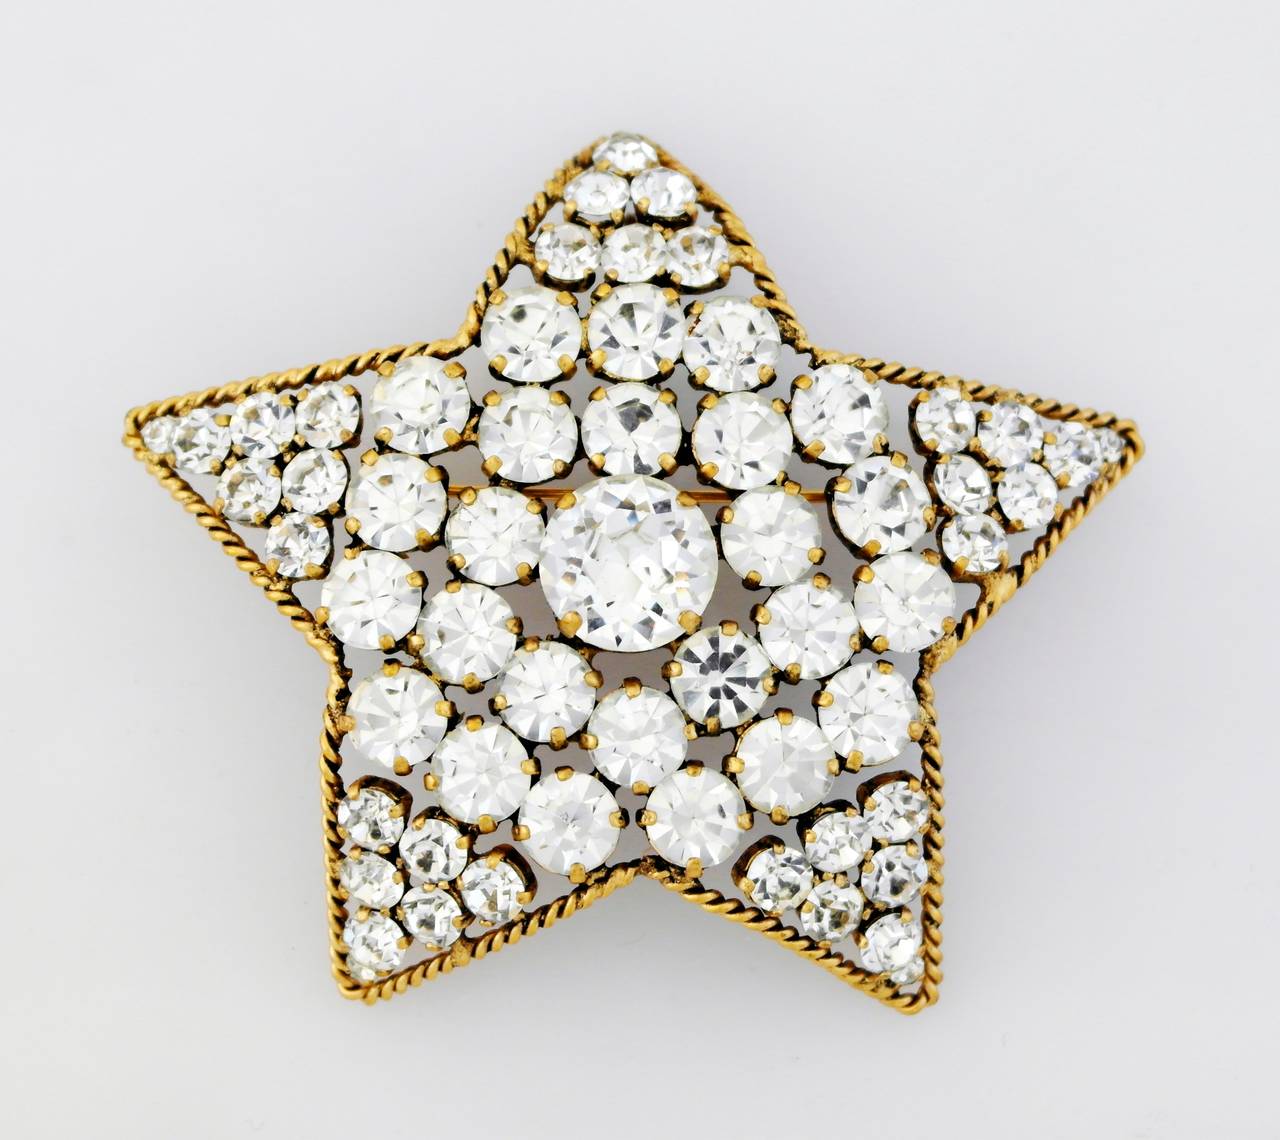 Rare 1983 Chanel Star Shaped Brooch/Pendant with Brilliant Rhinestones For Sale 1